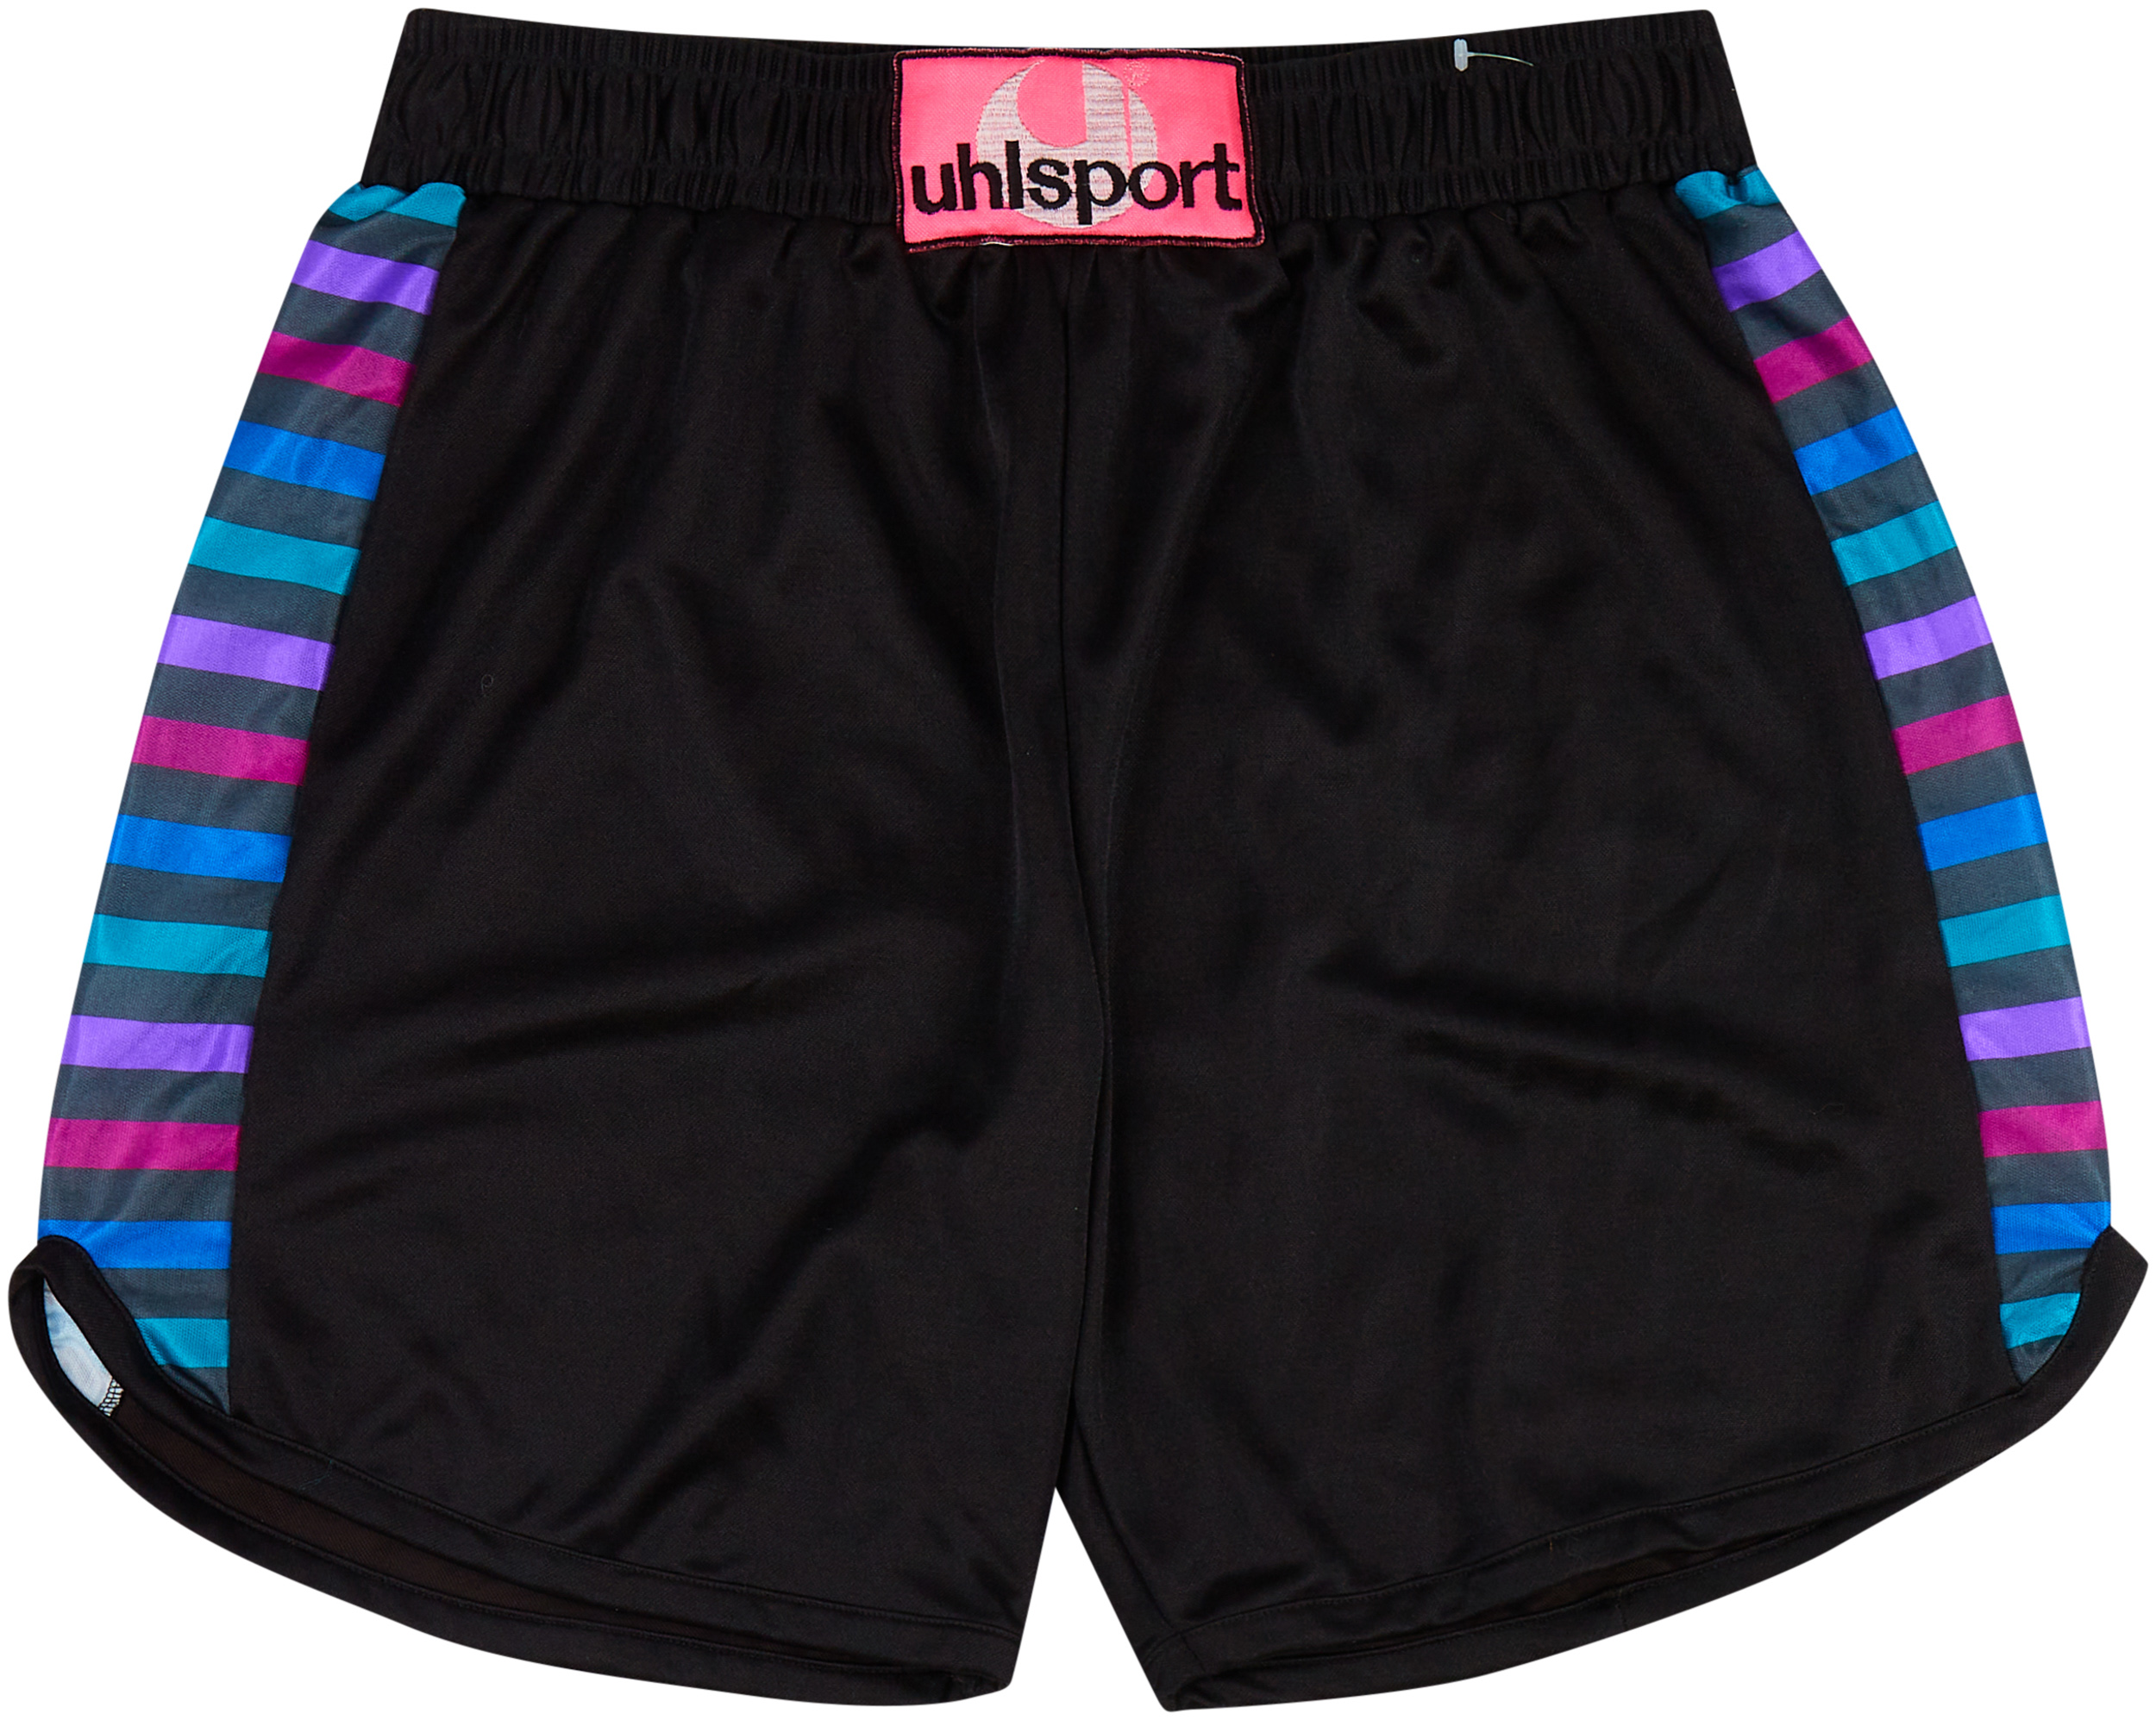 1990s Uhlsport Template Shorts - 9/10 - (XL)